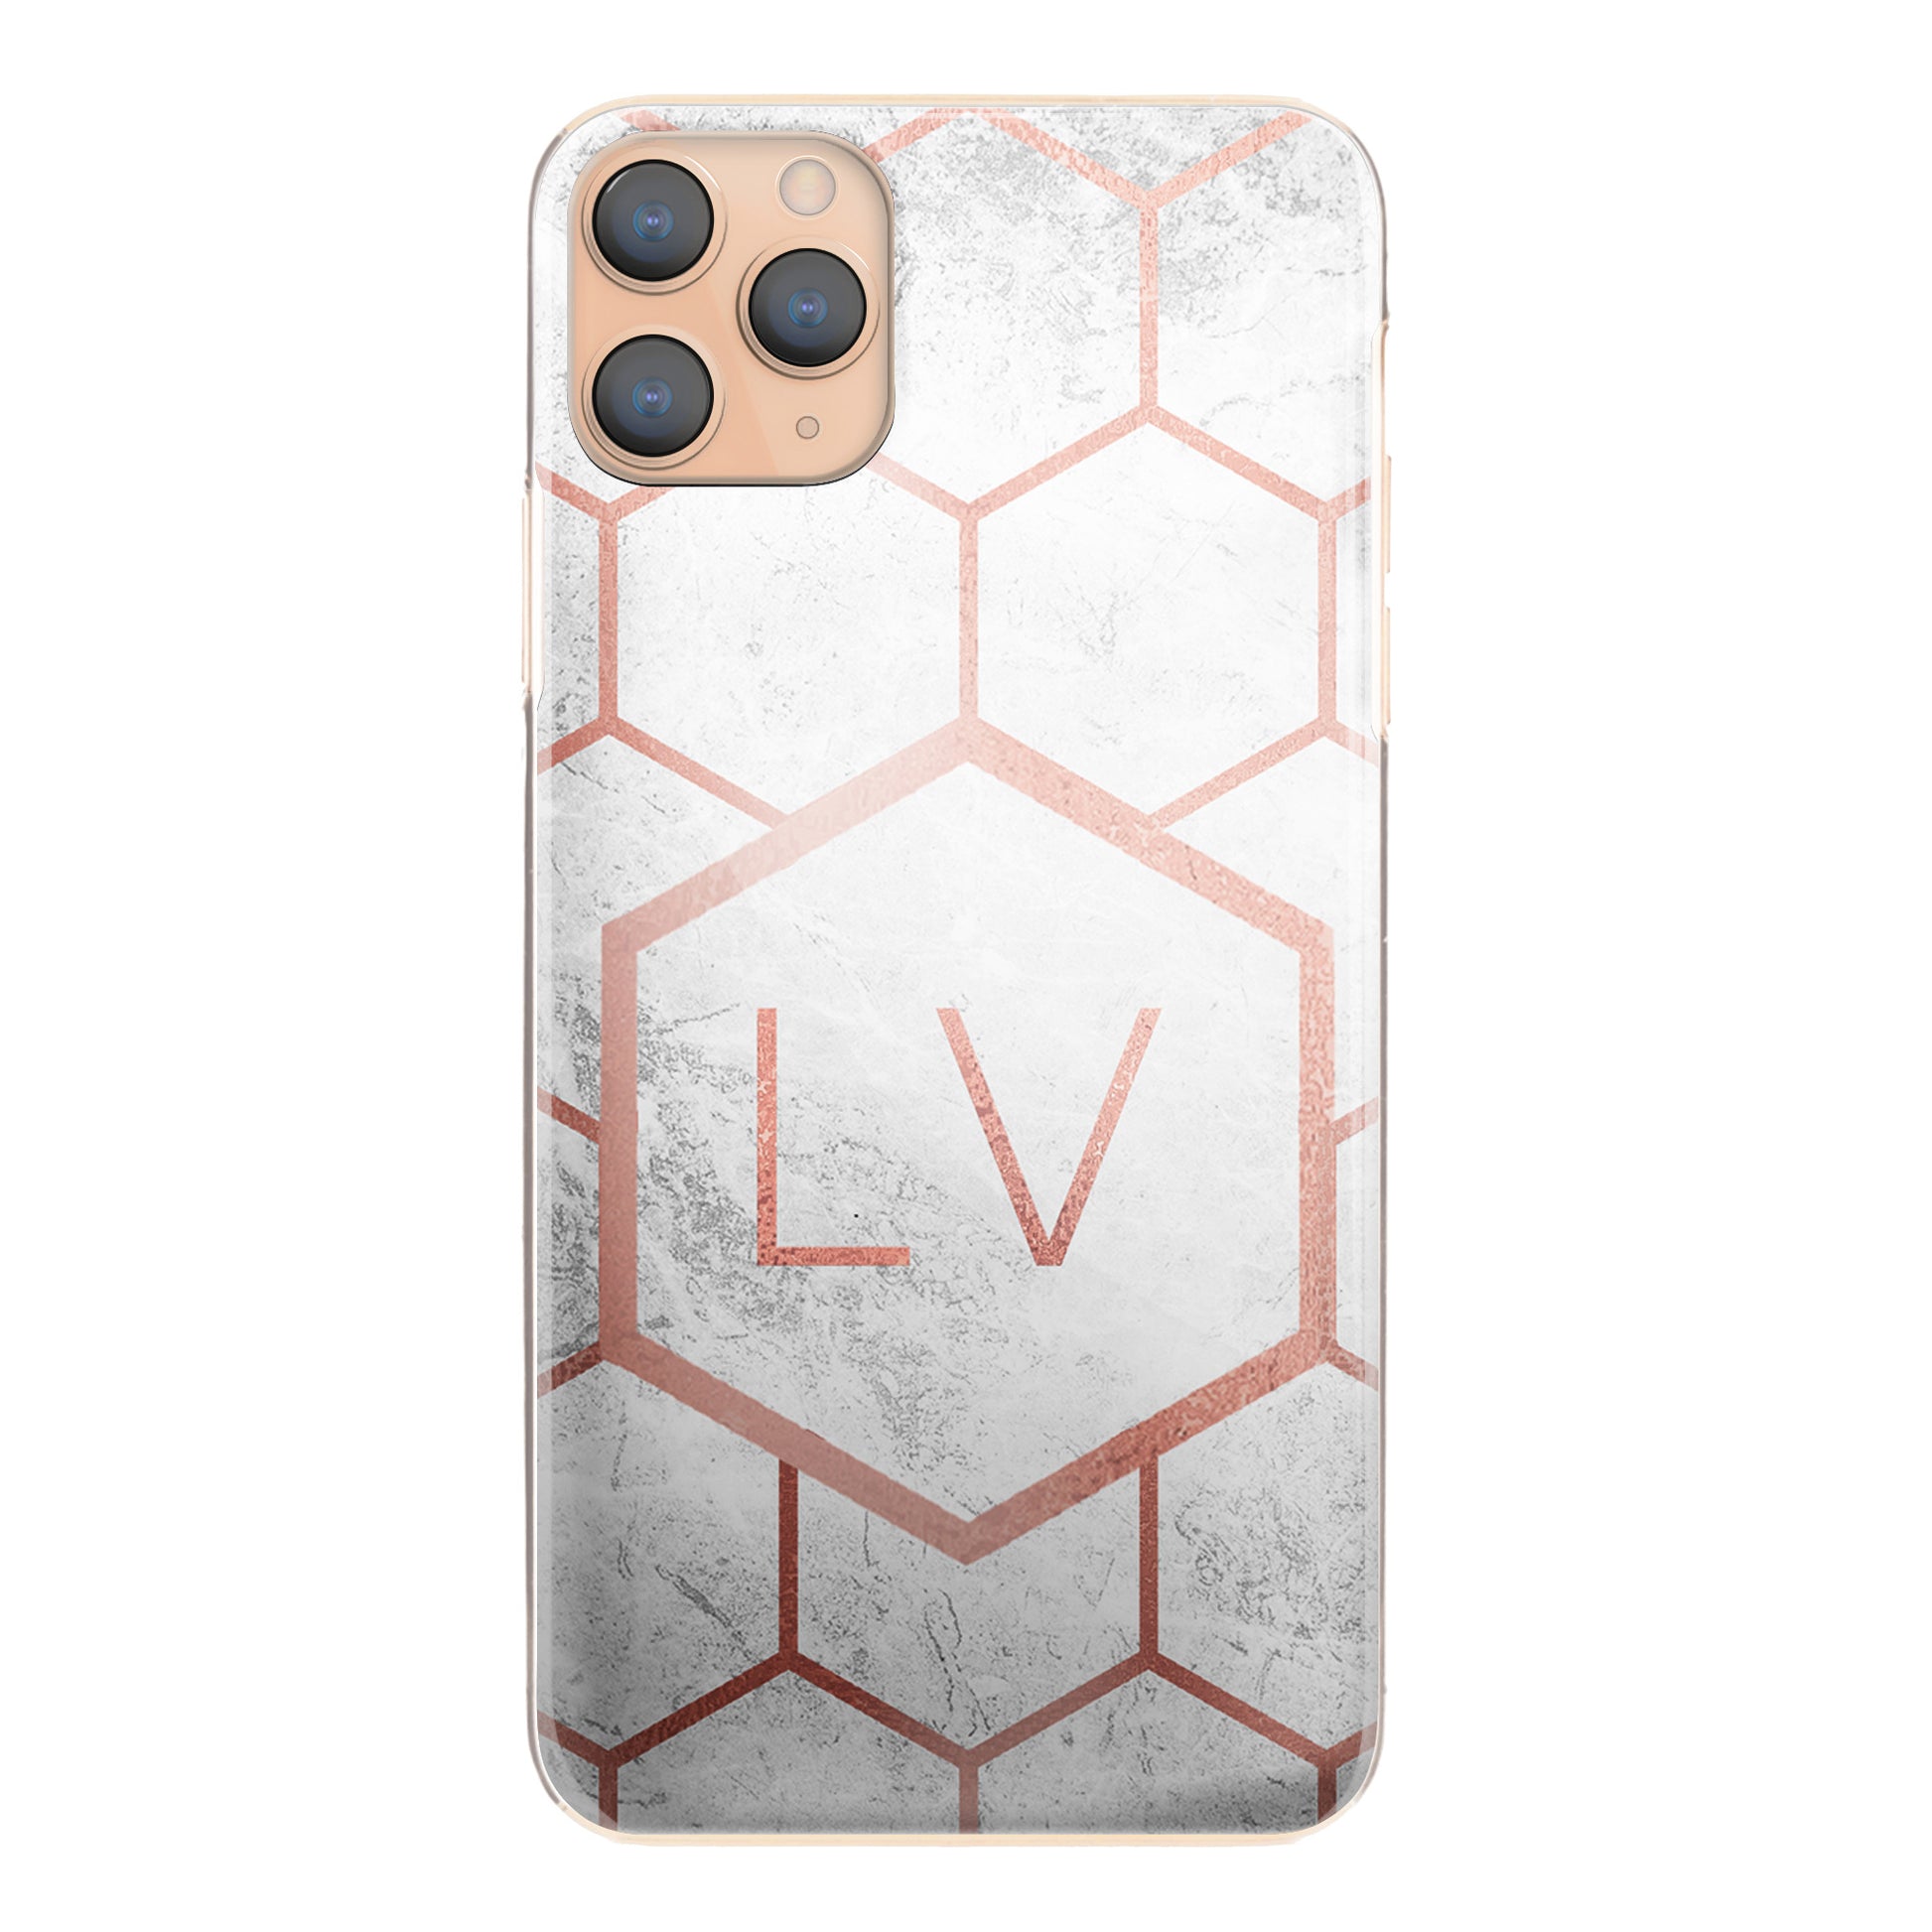 Personalised Nokia Phone Hard Case with Pink Initials and Honeycomb Pattern on Grey Marble